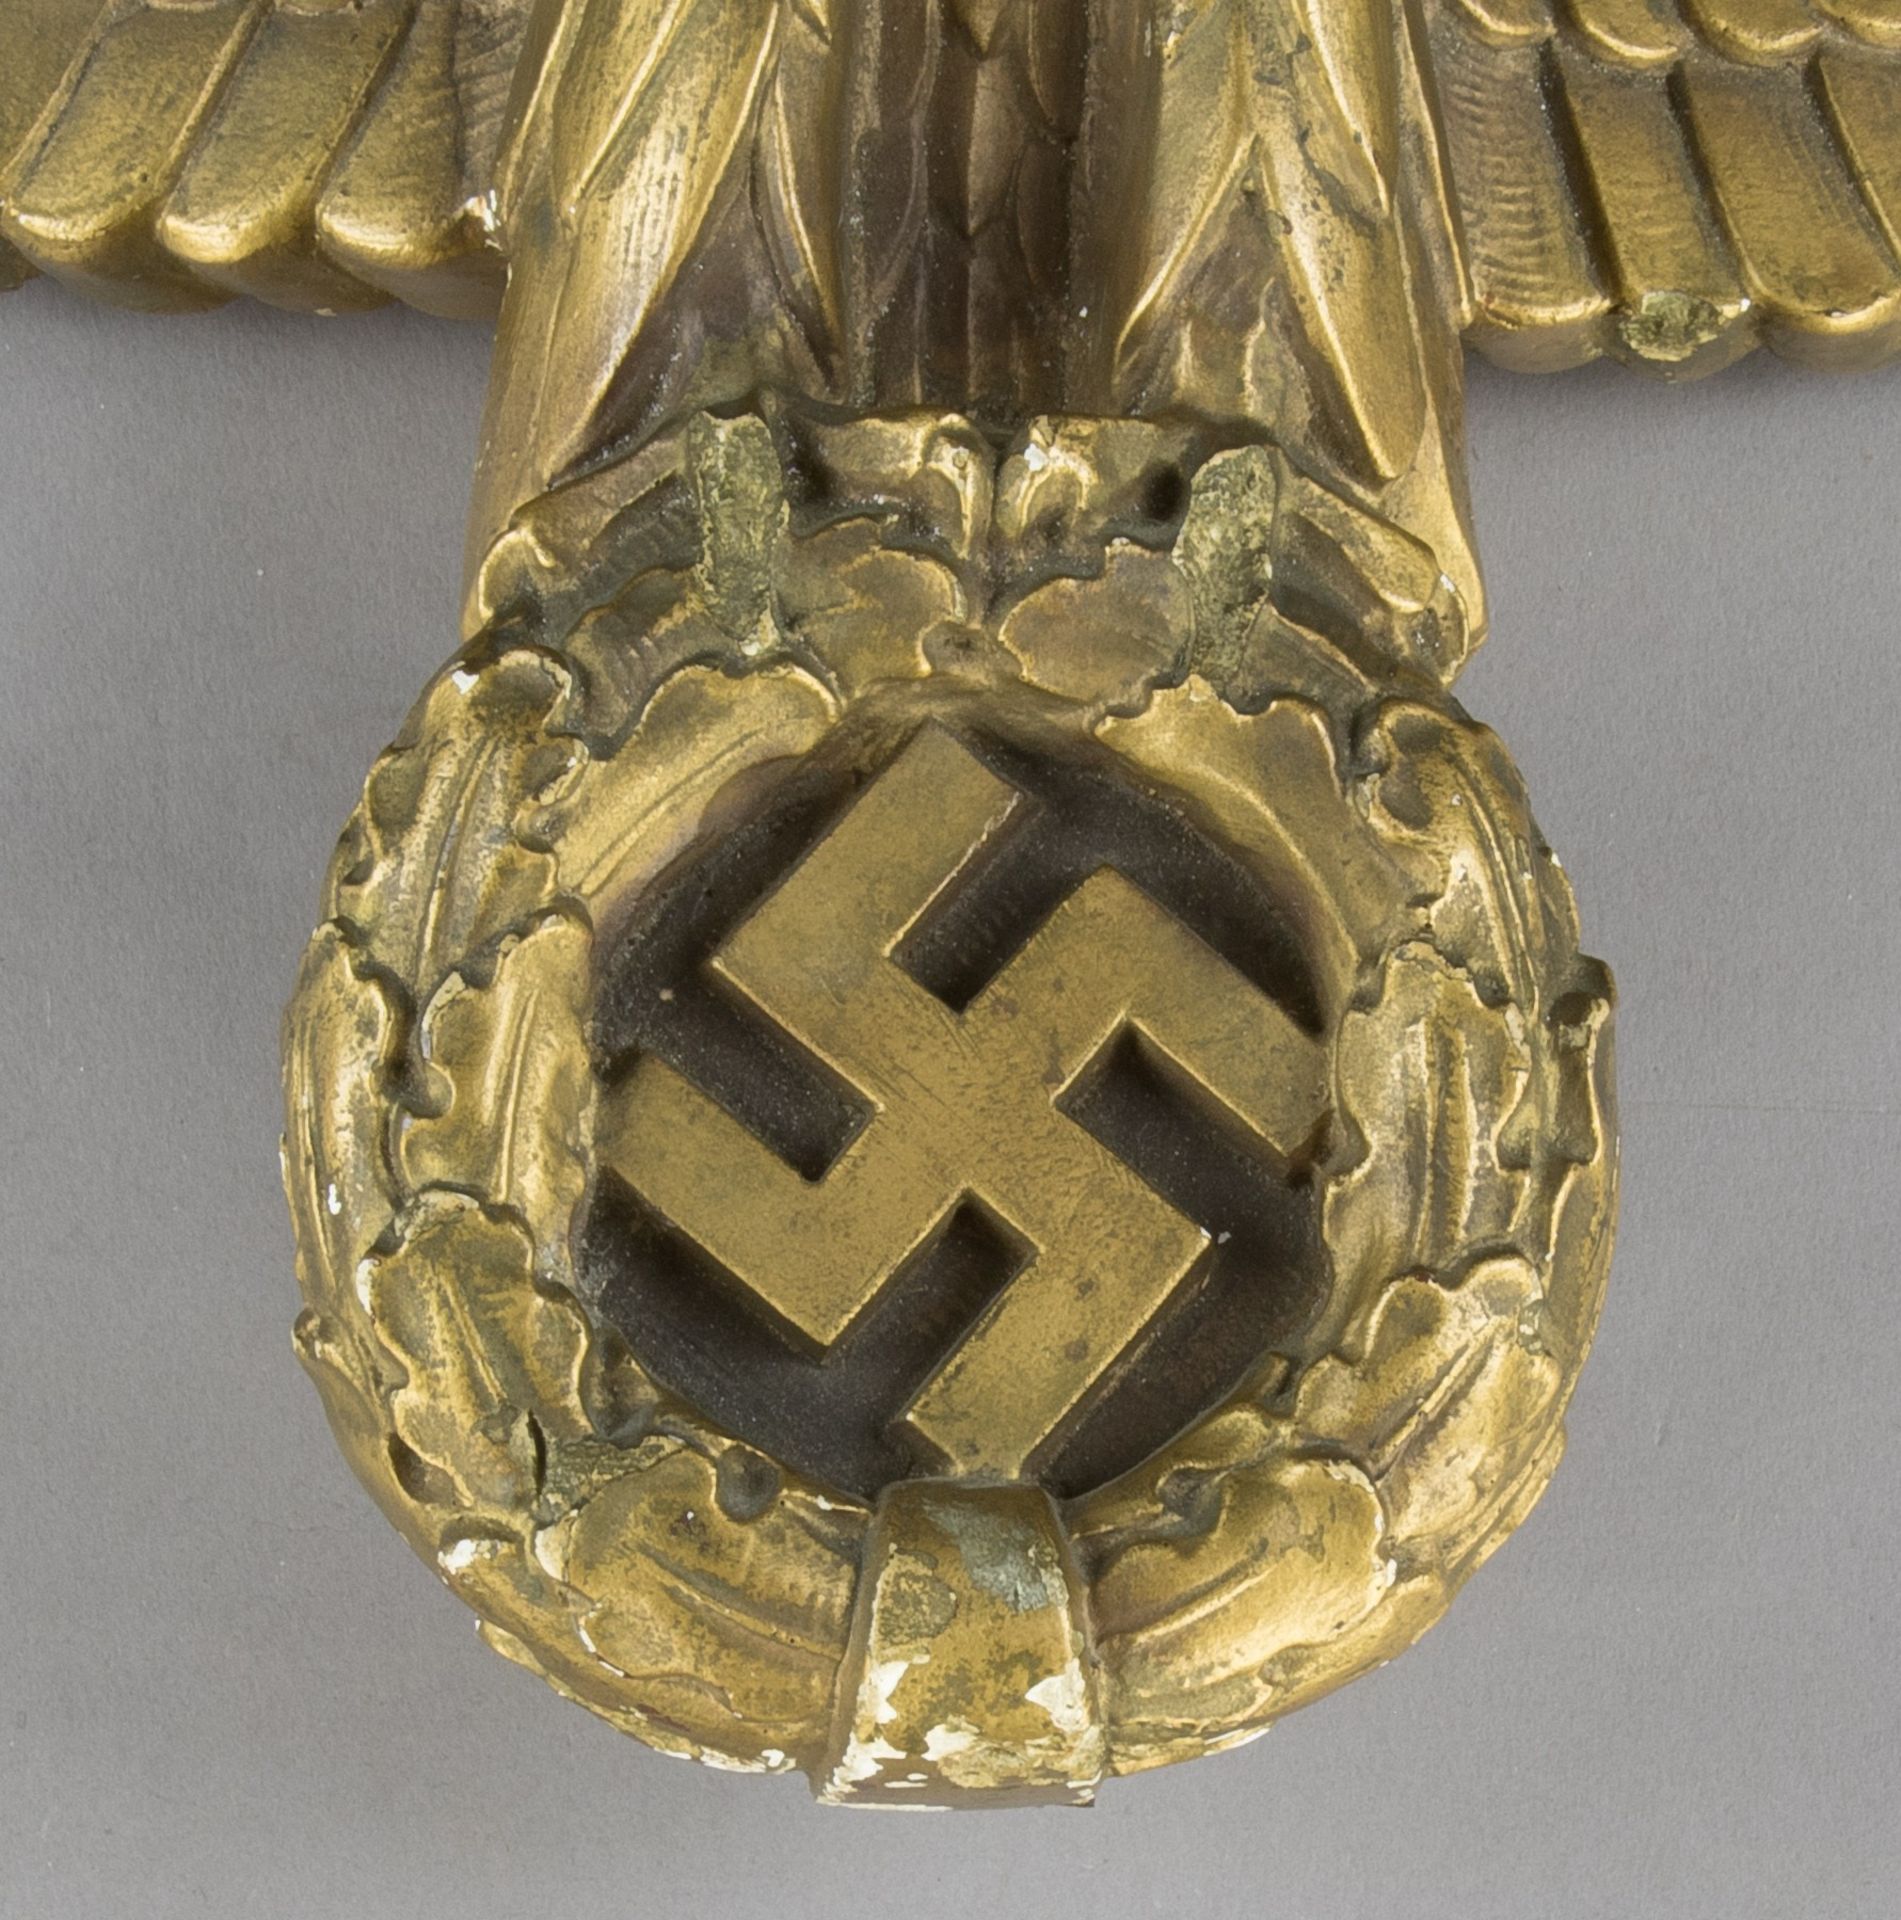 THE GOLDEN EAGLE FROM ADOLF HITLER'S REICHSCHANCELLERY BEDROOM - Image 6 of 13